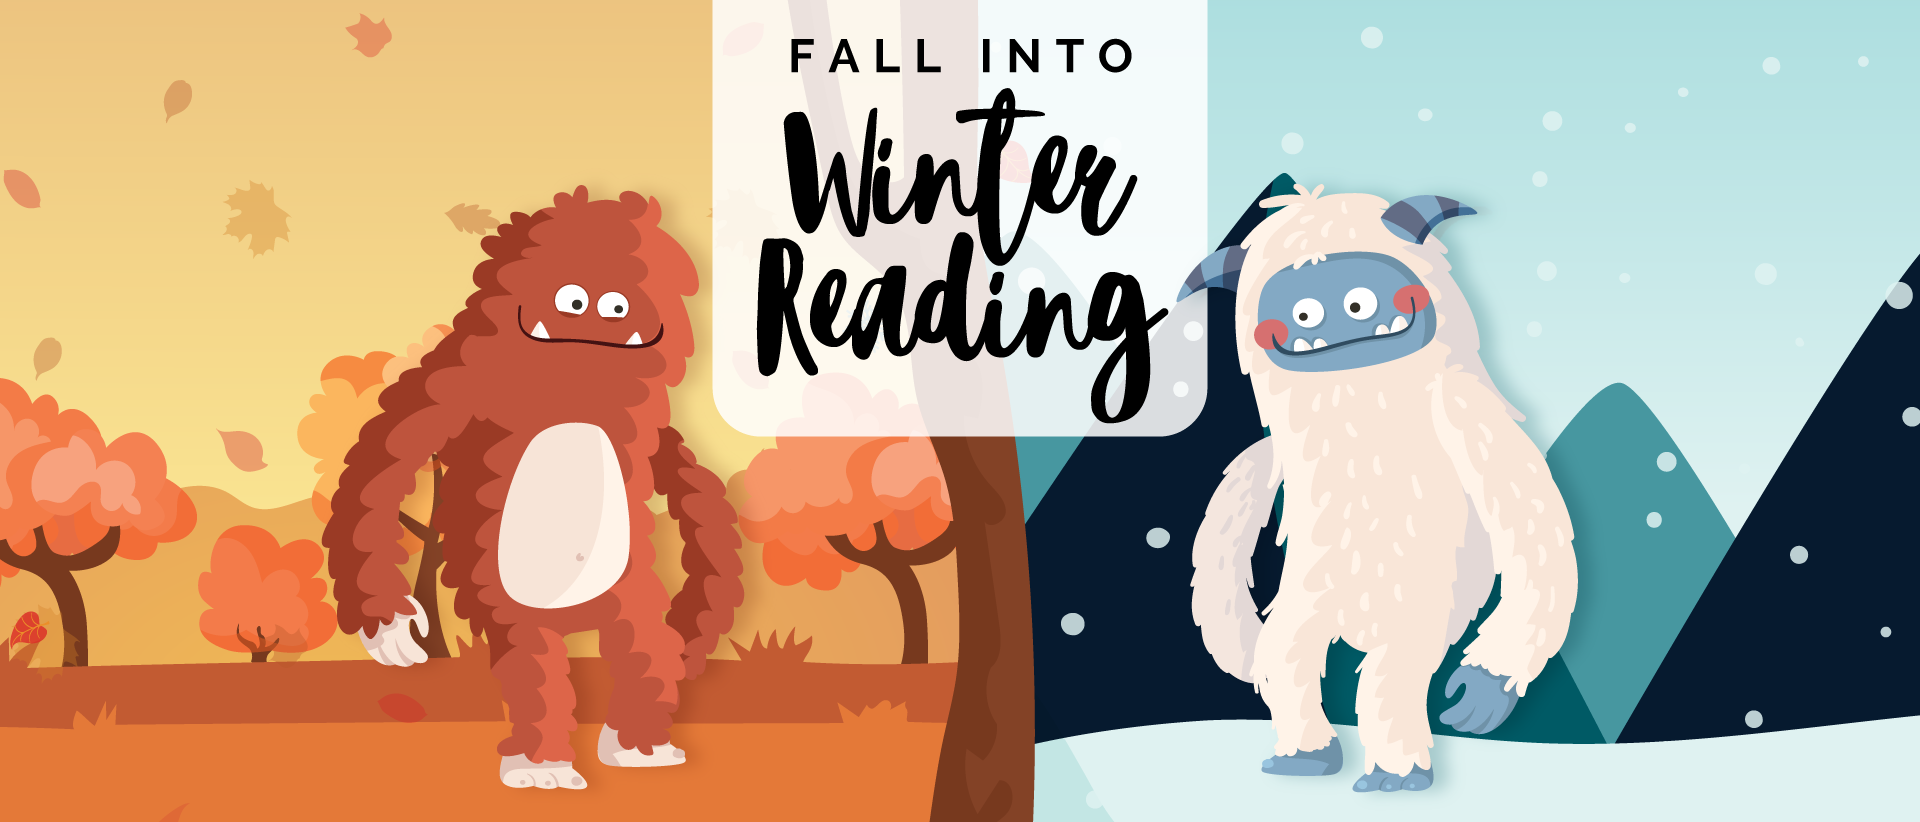 fall into winter reading banner: Bigfoot (on the left) and Yeti character (on the right)